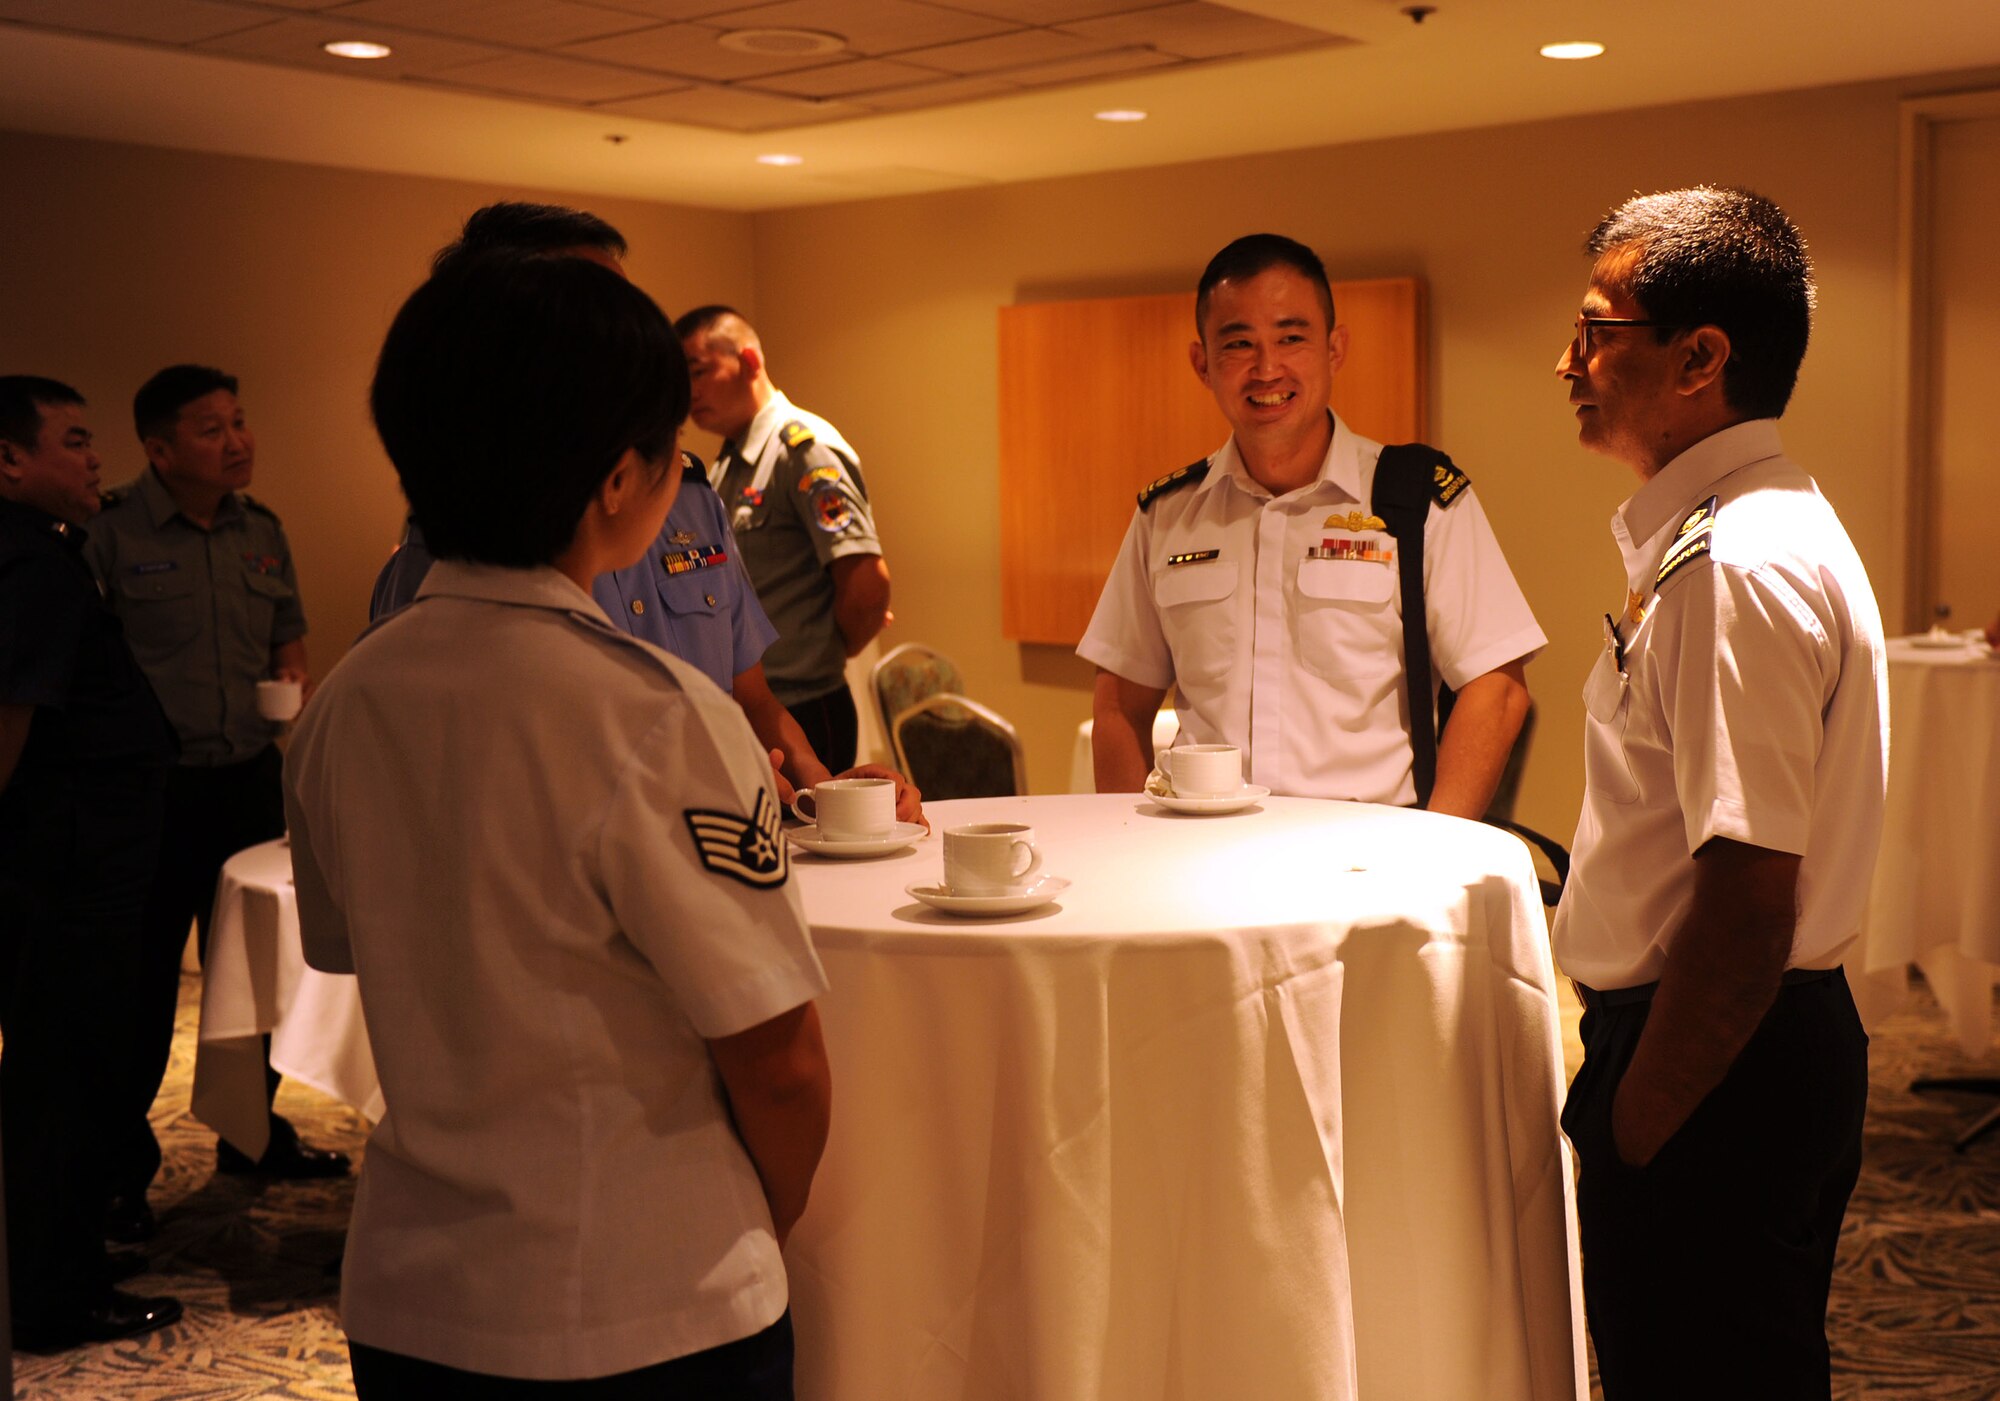 U.S. and multinational airmen speak with each other during a break in discussion sessions at the Pacific Rim Airpower Symposium Sept. 22, 2015, in Honolulu, Hawaii. Senior officer and enlisted airmen from nations throughout the Indo-Asia-Pacific region attended the symposium to discuss ways to improve cooperation, leadership and coordination efforts. (U.S. Air Force photo by Staff Sgt. Alexander Martinez/Released)